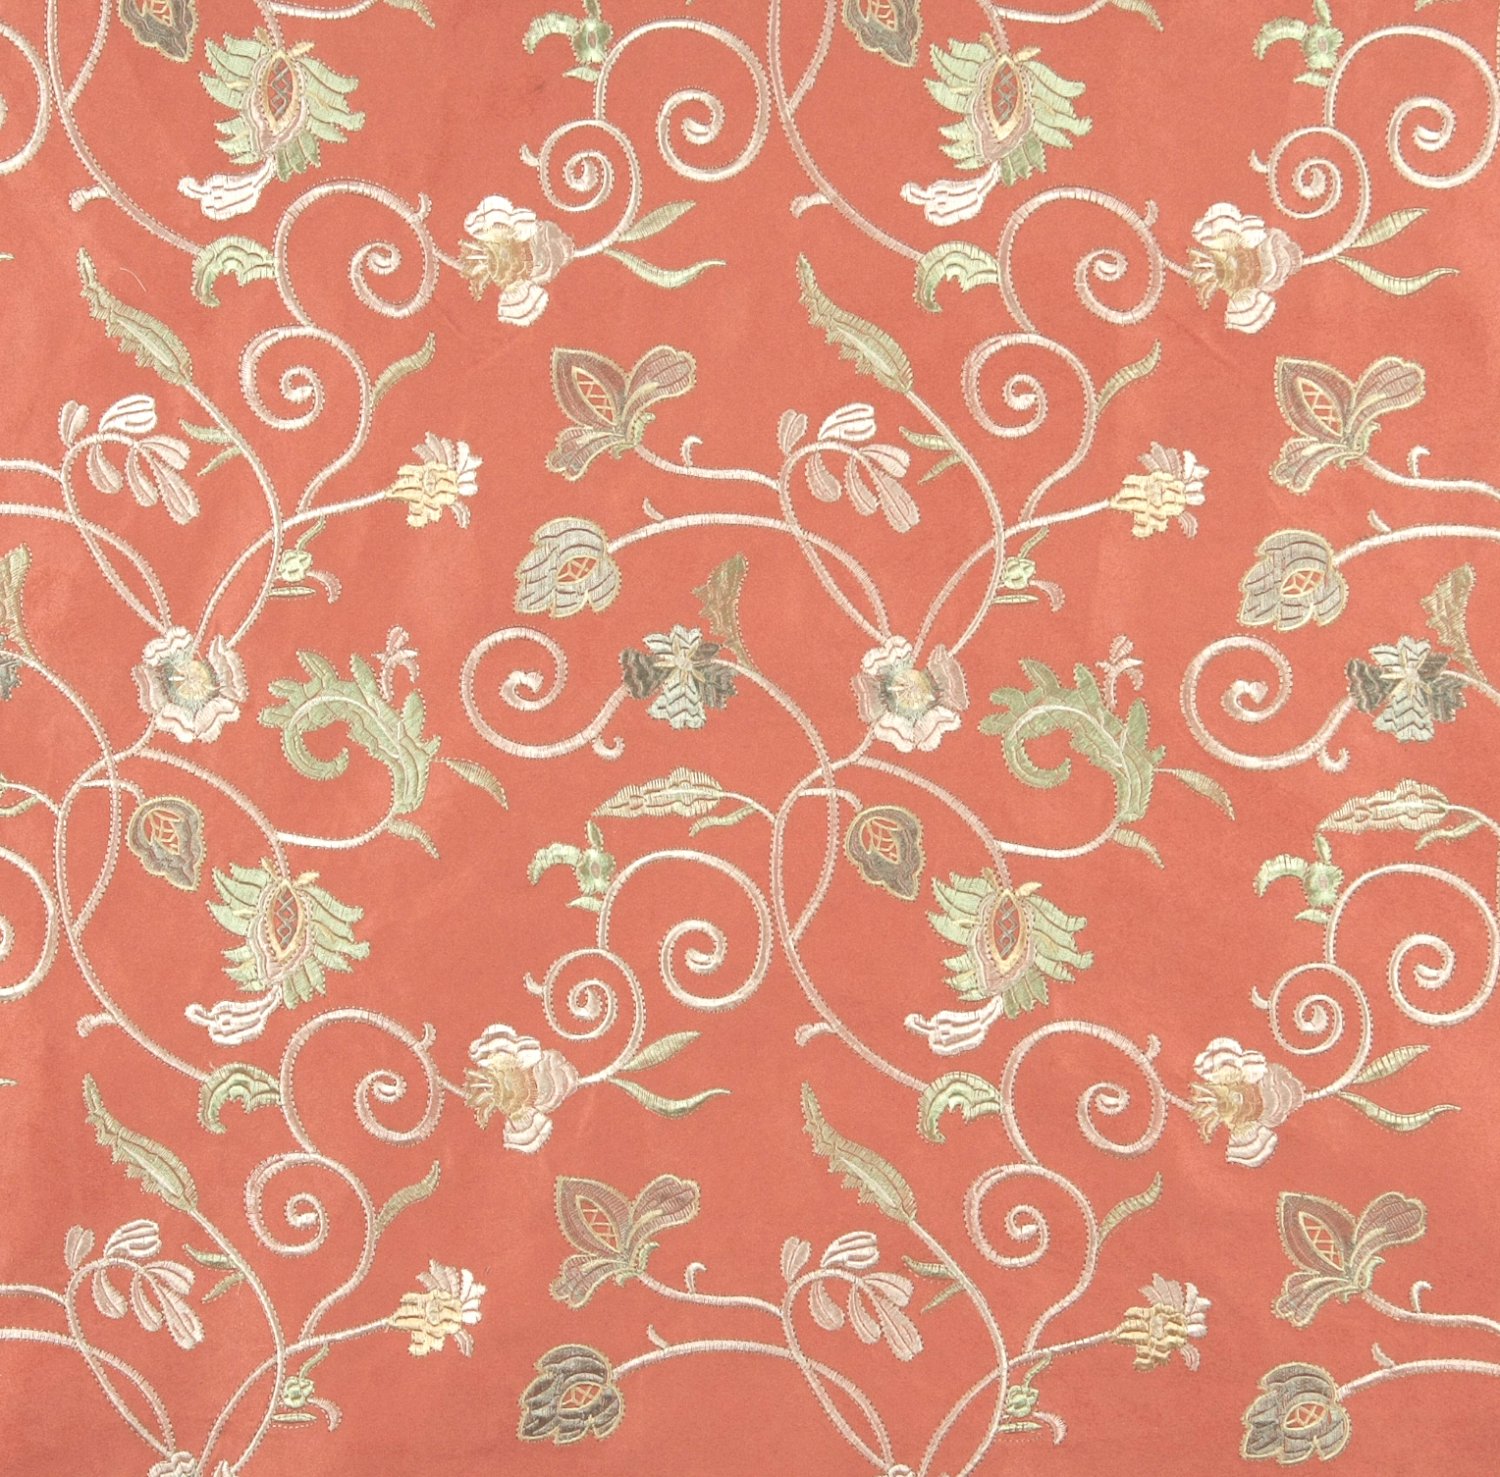 Persimmon Green Gold Ivory Suede Upholstery Fabric By The Yard Embroidered Floral Vines Pattern B103